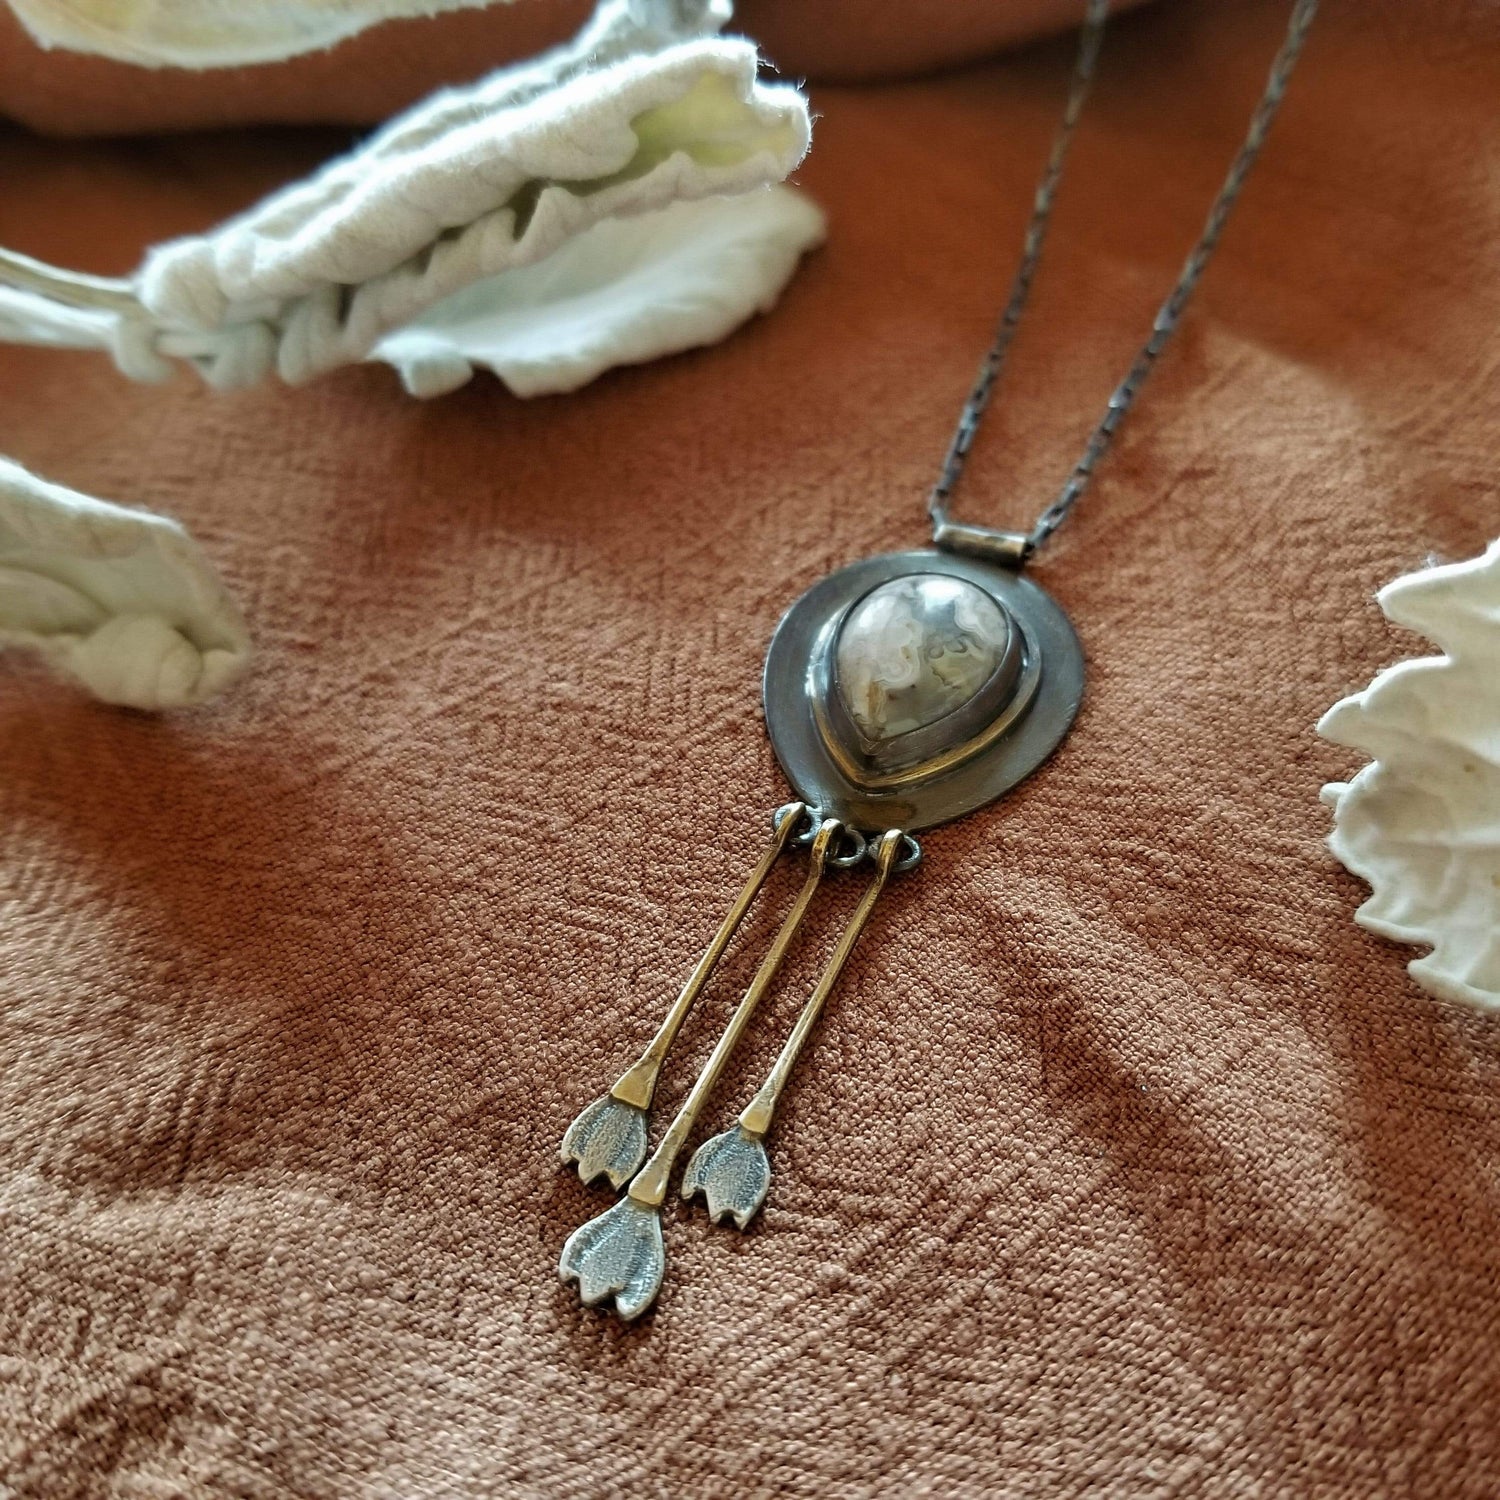 Handmade one of a kind sterling silver and brass necklace. Tear drop Mexican Agate (white and grey colors) set in sterling silver and brass with 3 individual hand engraved snowdrop flowers hanging from brass fringe. All hanging from a sterling silver box chain. 